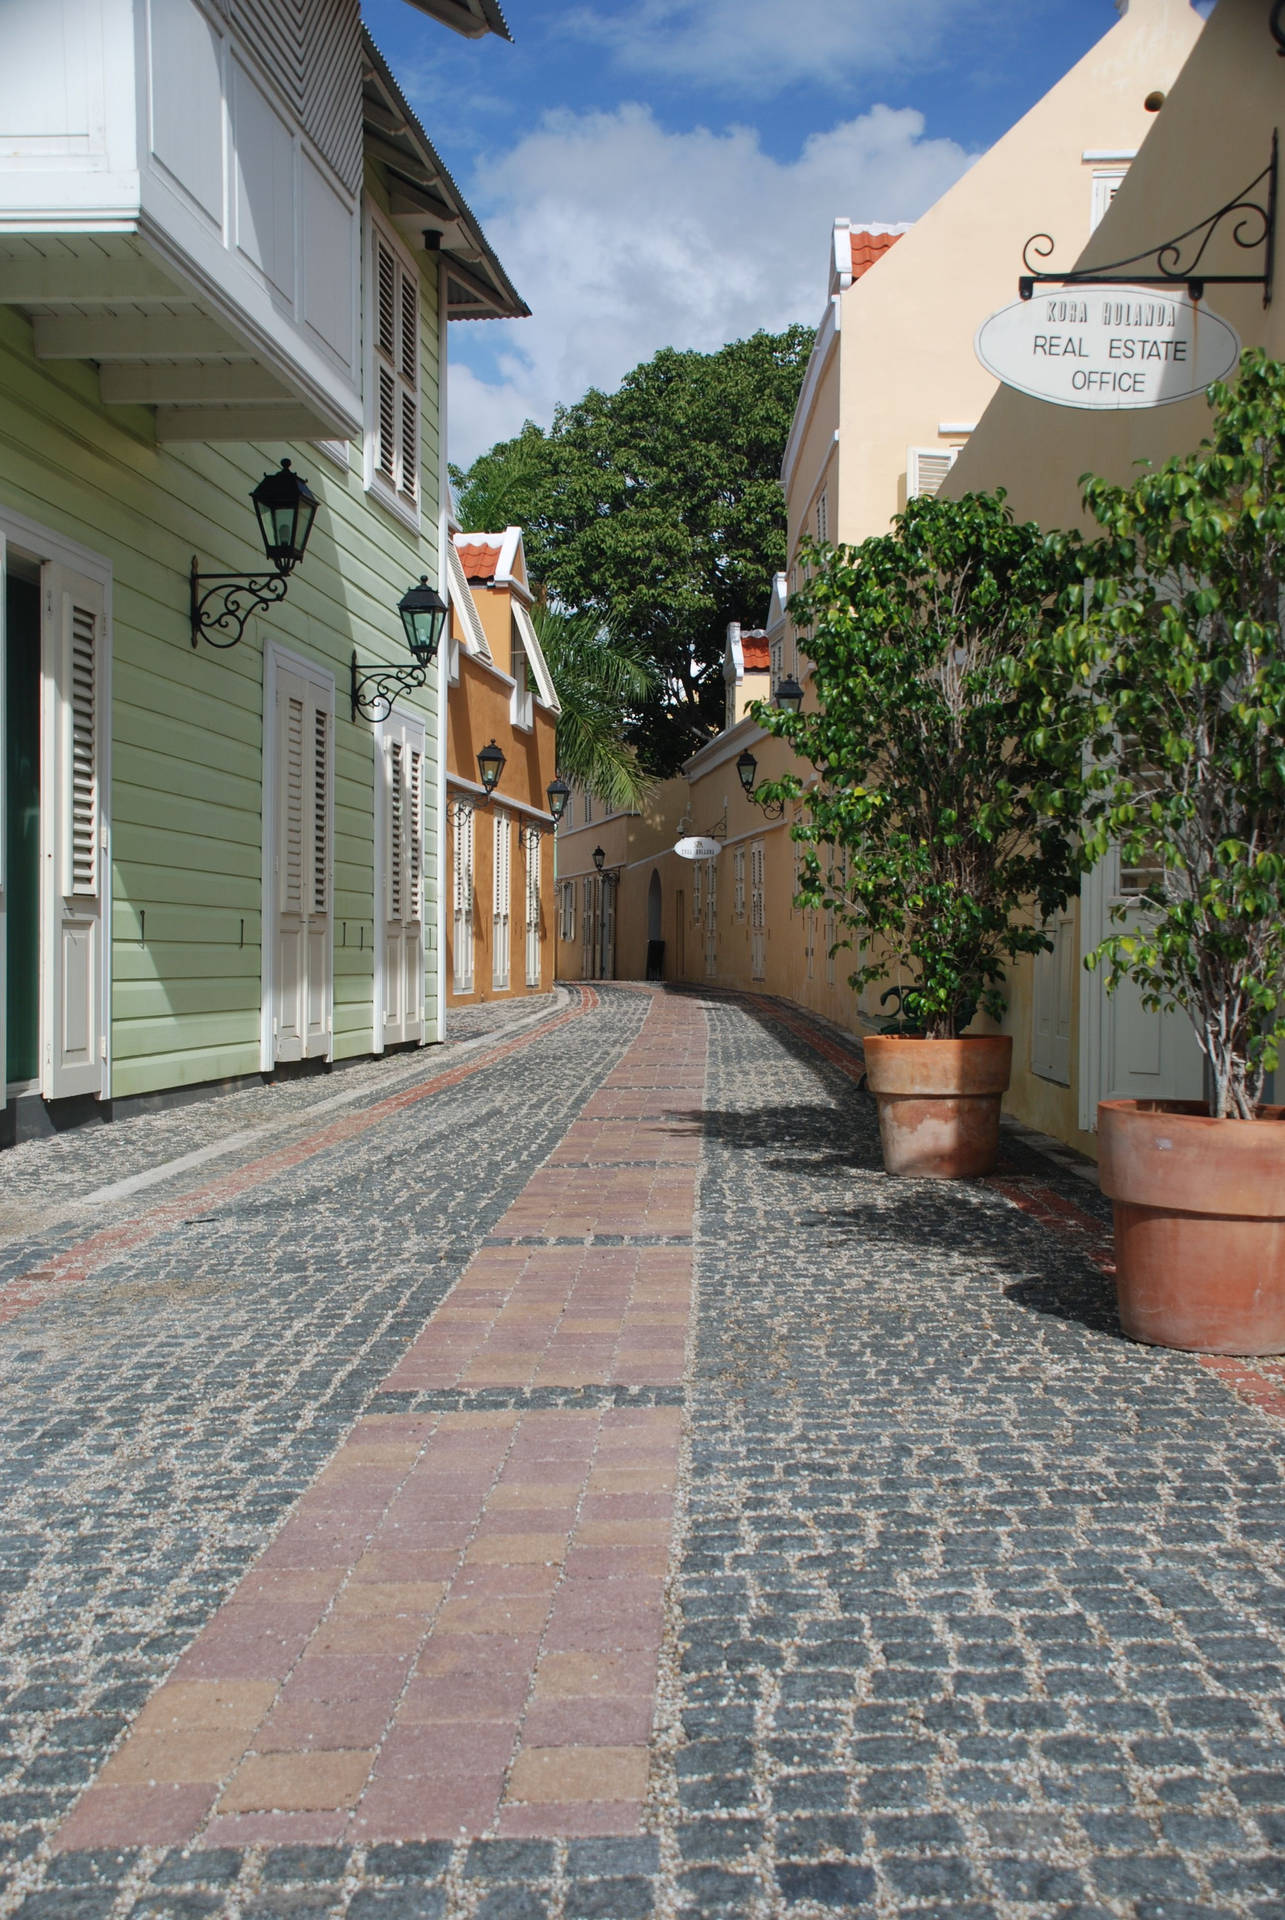 Authentic Willemstad, Curacao Street Wallpaper